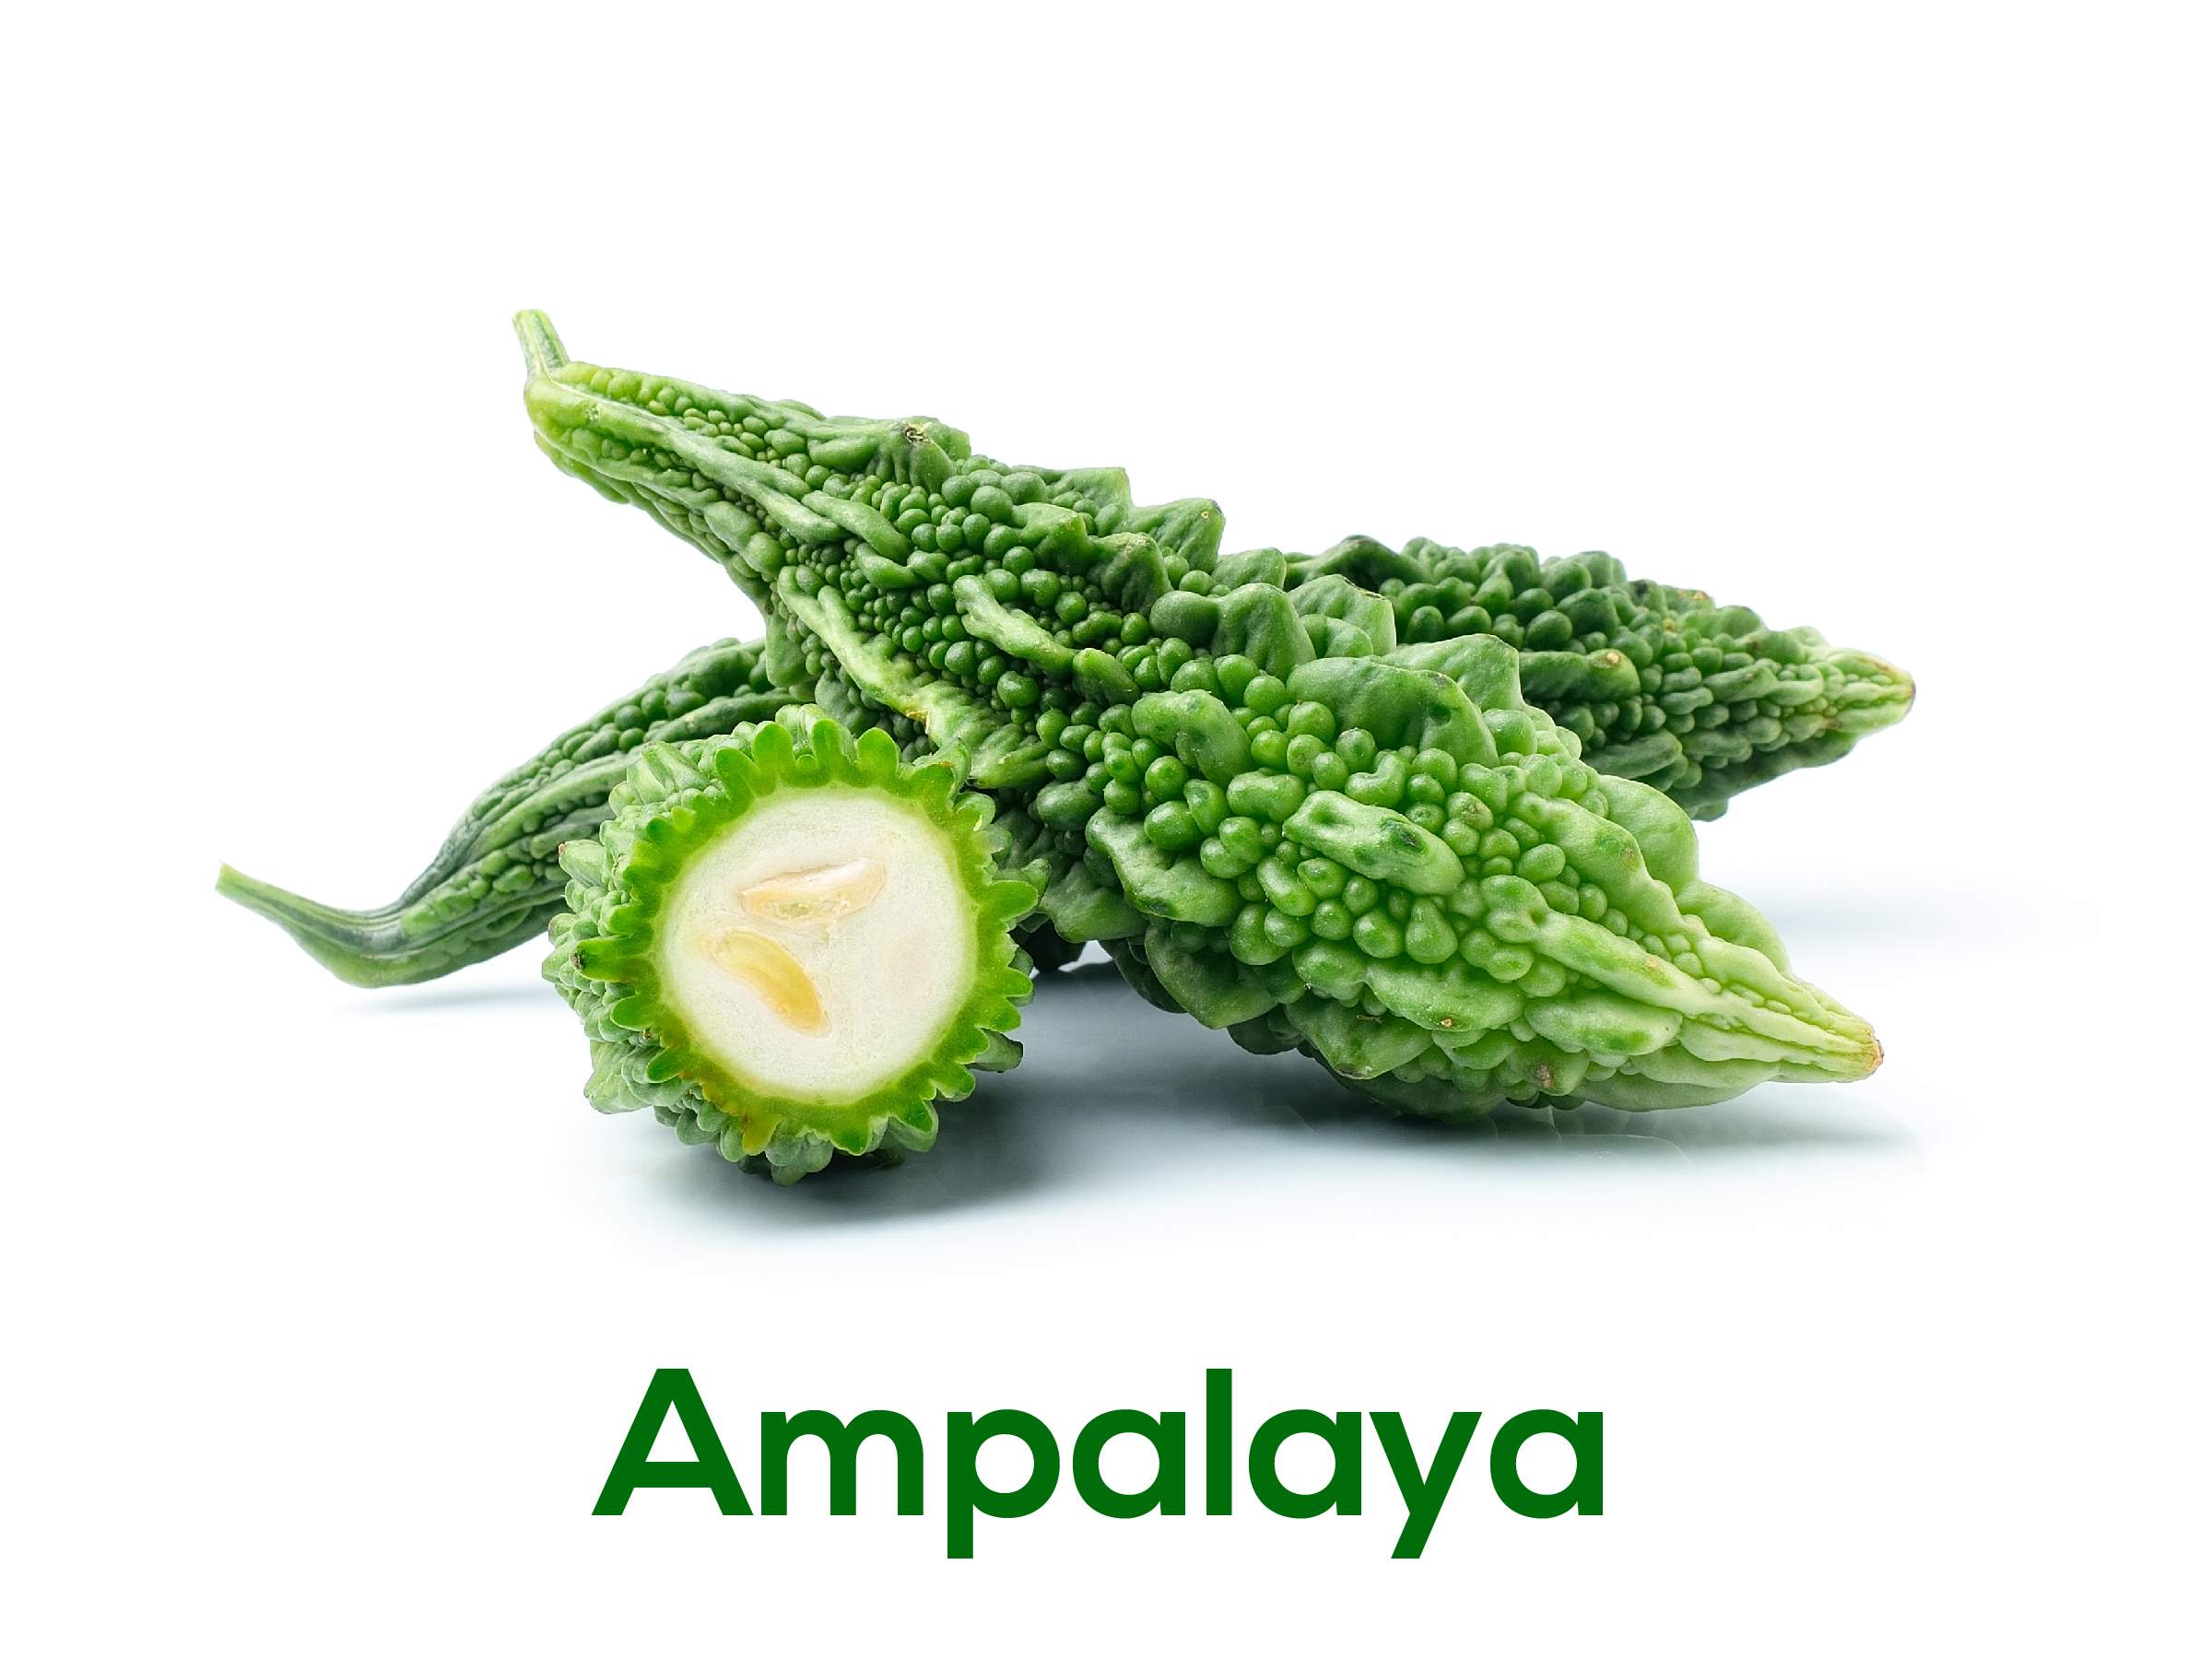 Get To Know The Health Benefits Of Each Ampalaya Plus Ingredient